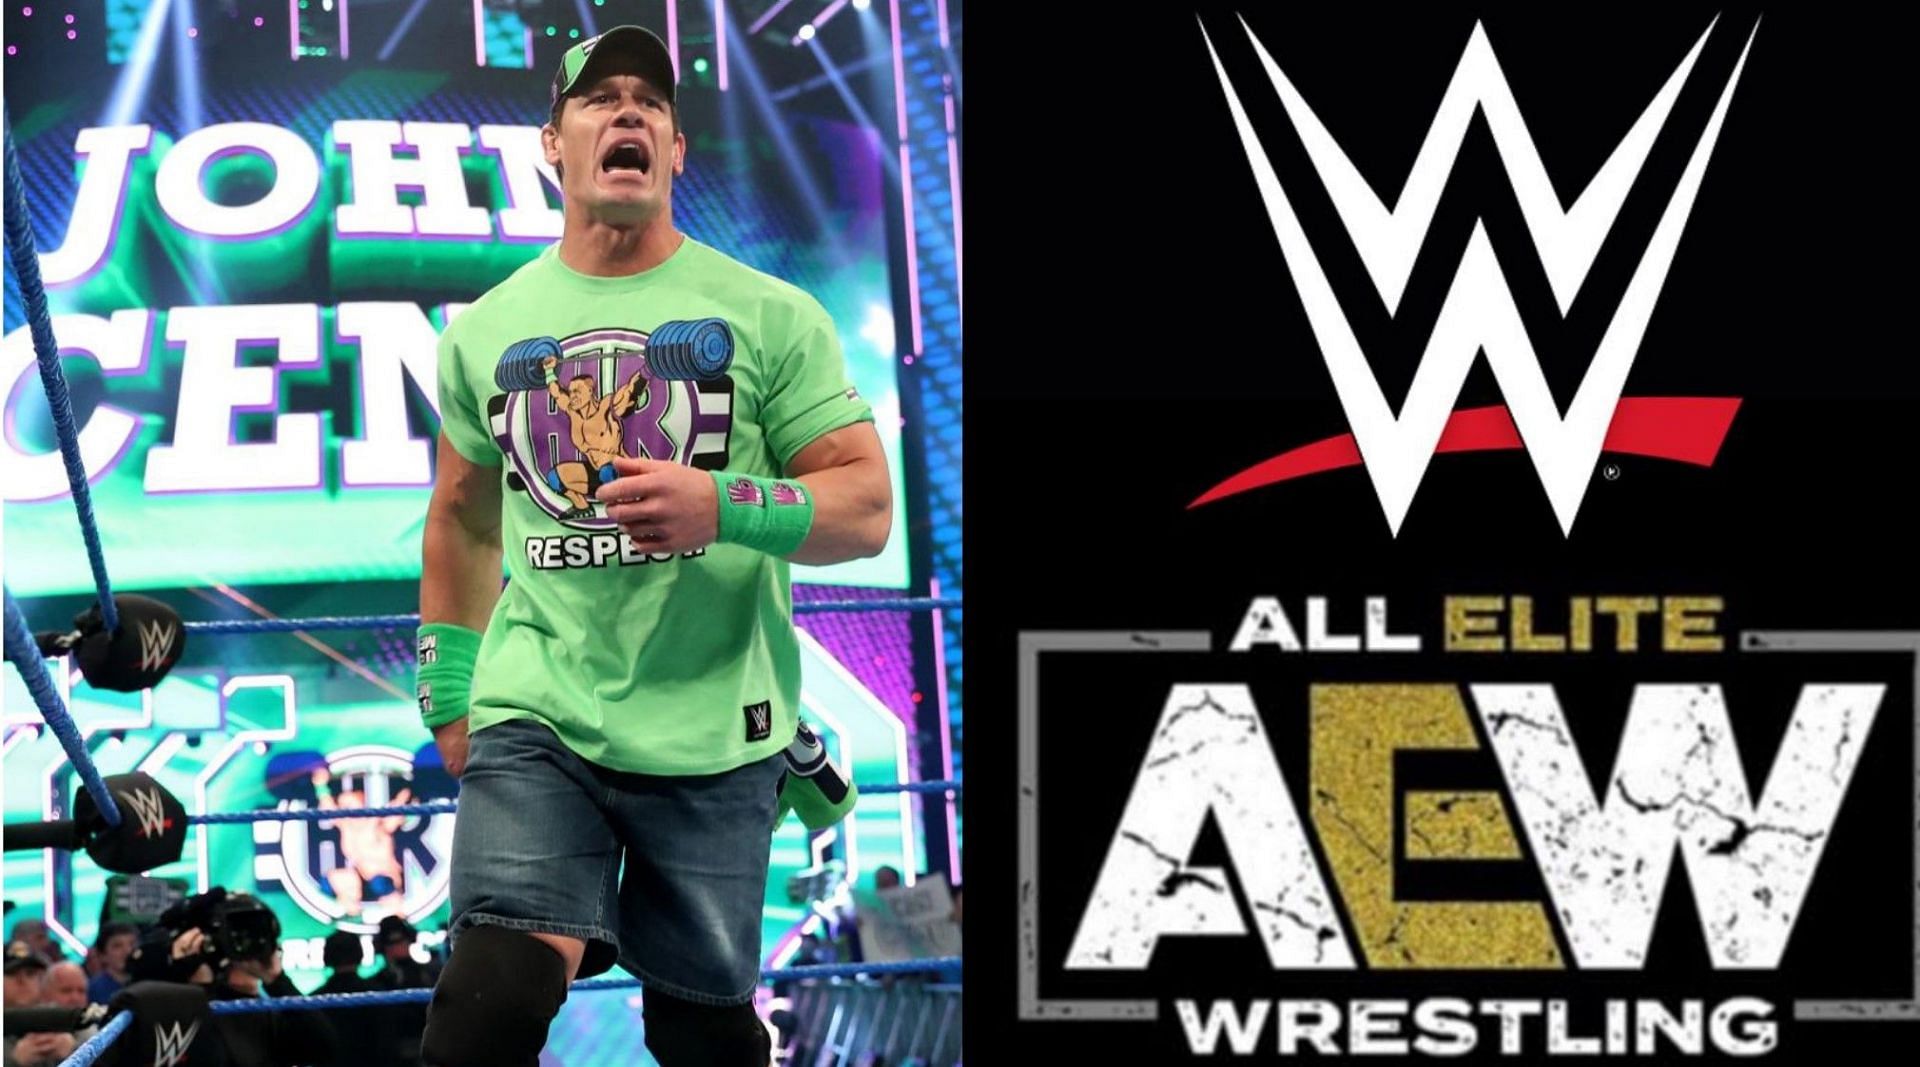 The Cenation Leader is a 16-time WWE Champion!